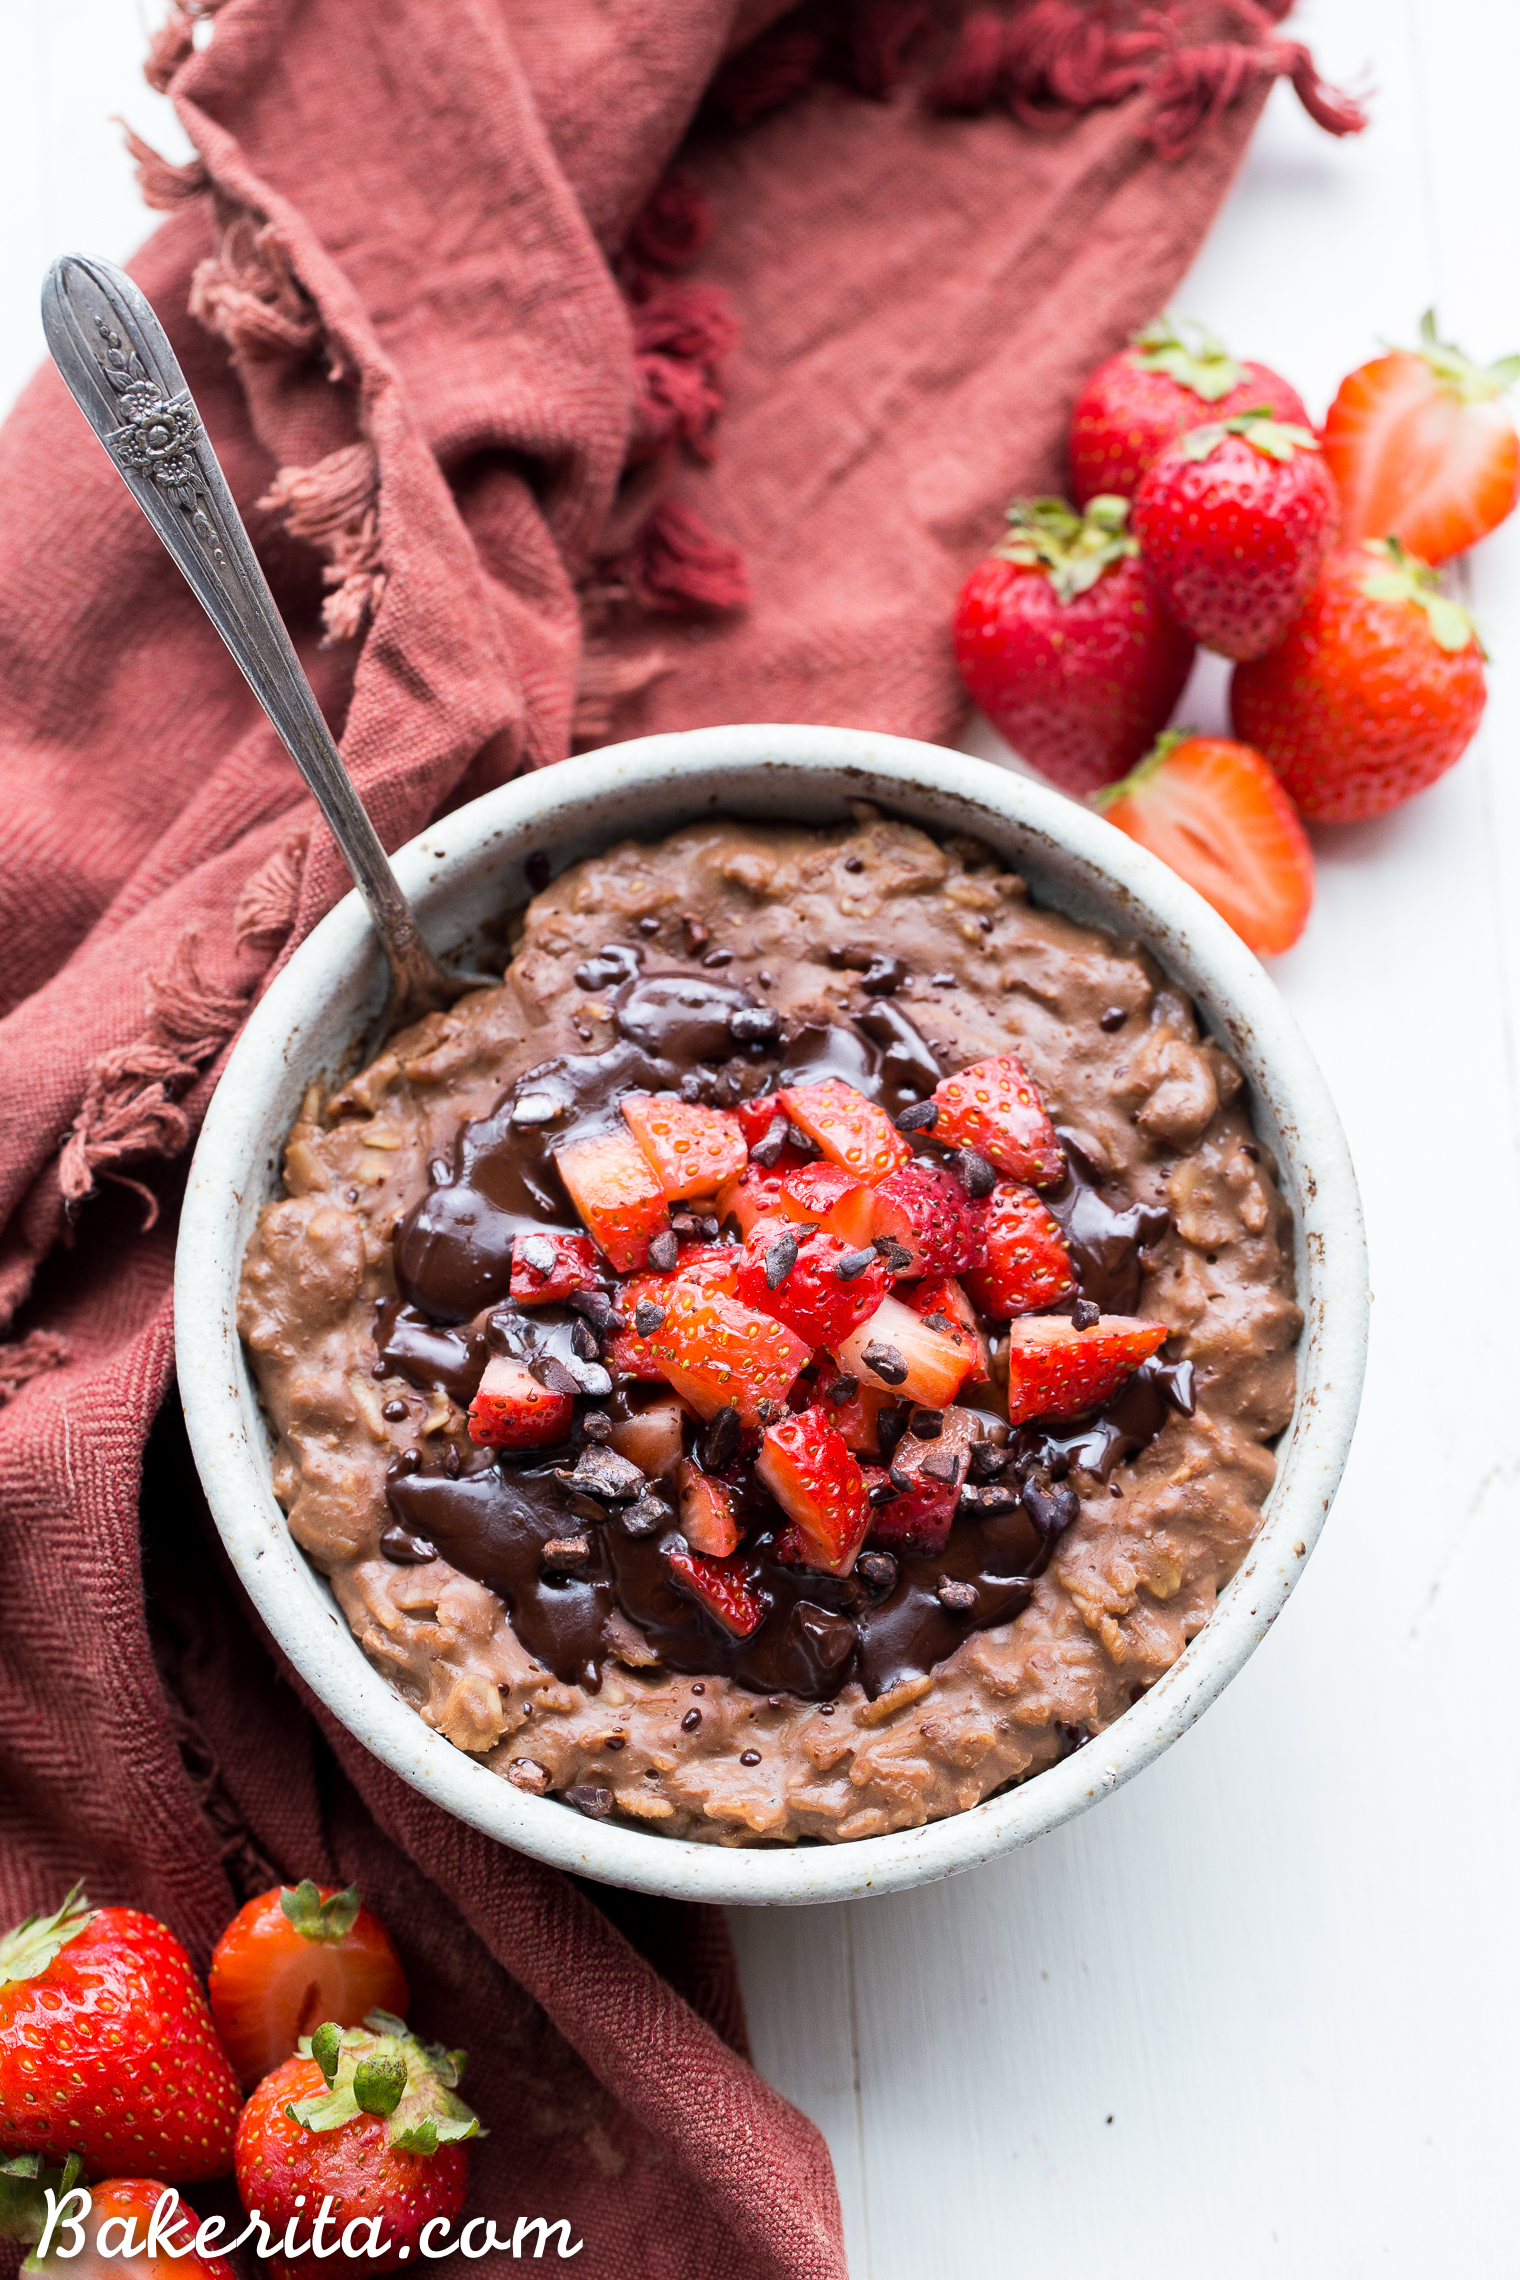 This Chocolate Strawberry Oatmeal tastes like dessert for breakfast, but you can enjoy it guilt-free! This oatmeal is sweetened with just a ripe banana, no added sugar needed. It's gluten-free, refined sugar free, and vegan.